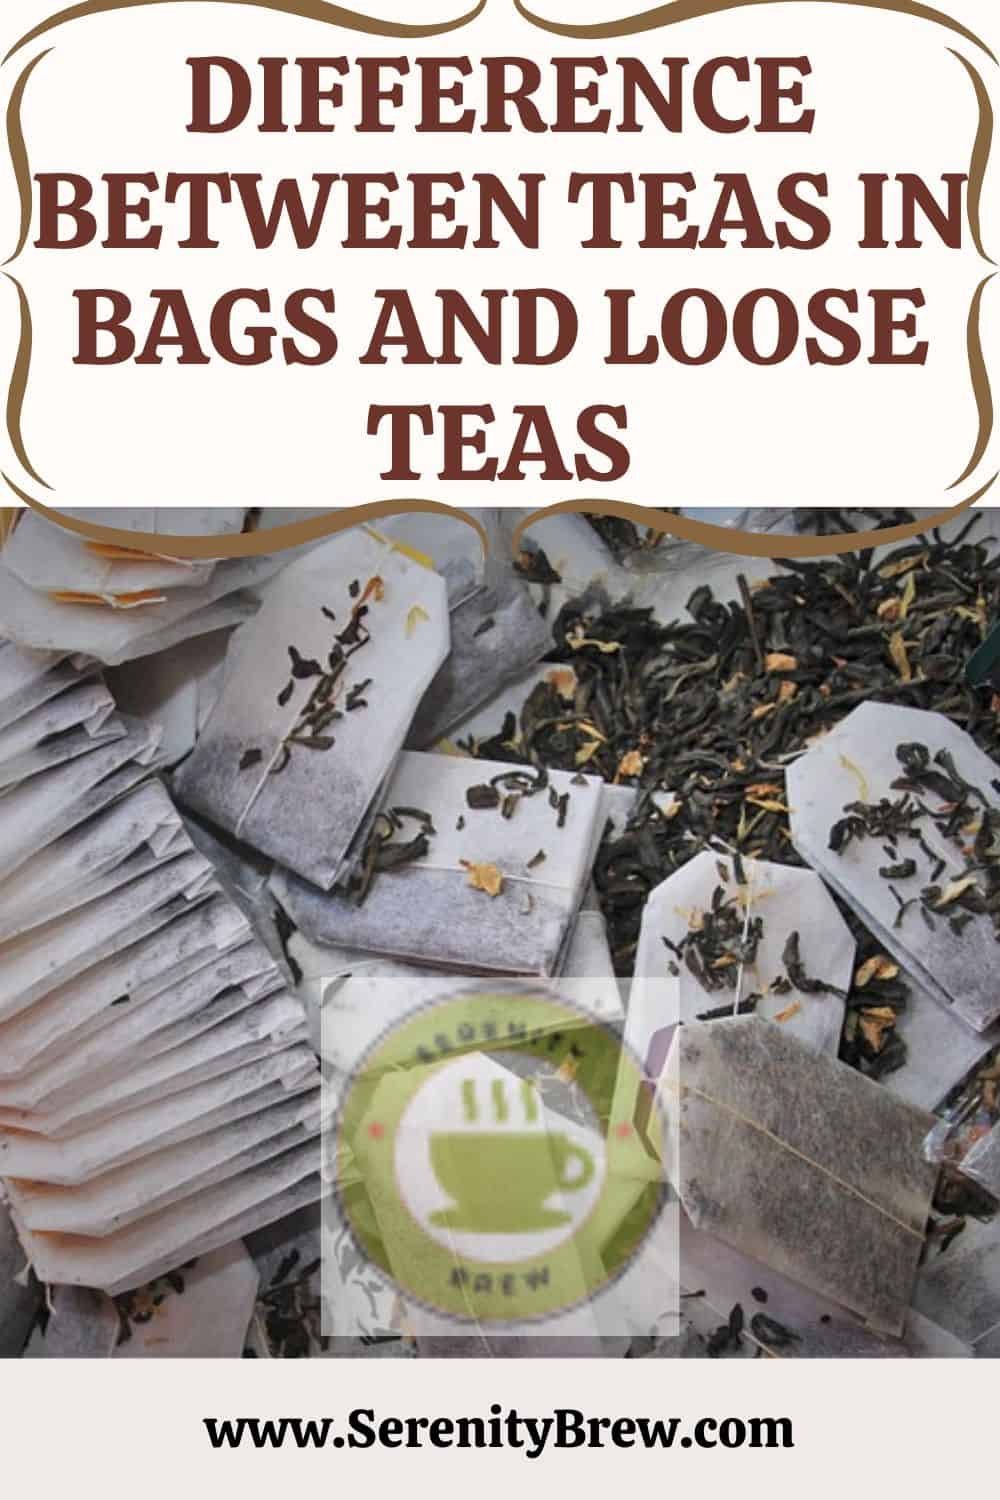 Difference between teas in bags and loose teas - Serenity Brew